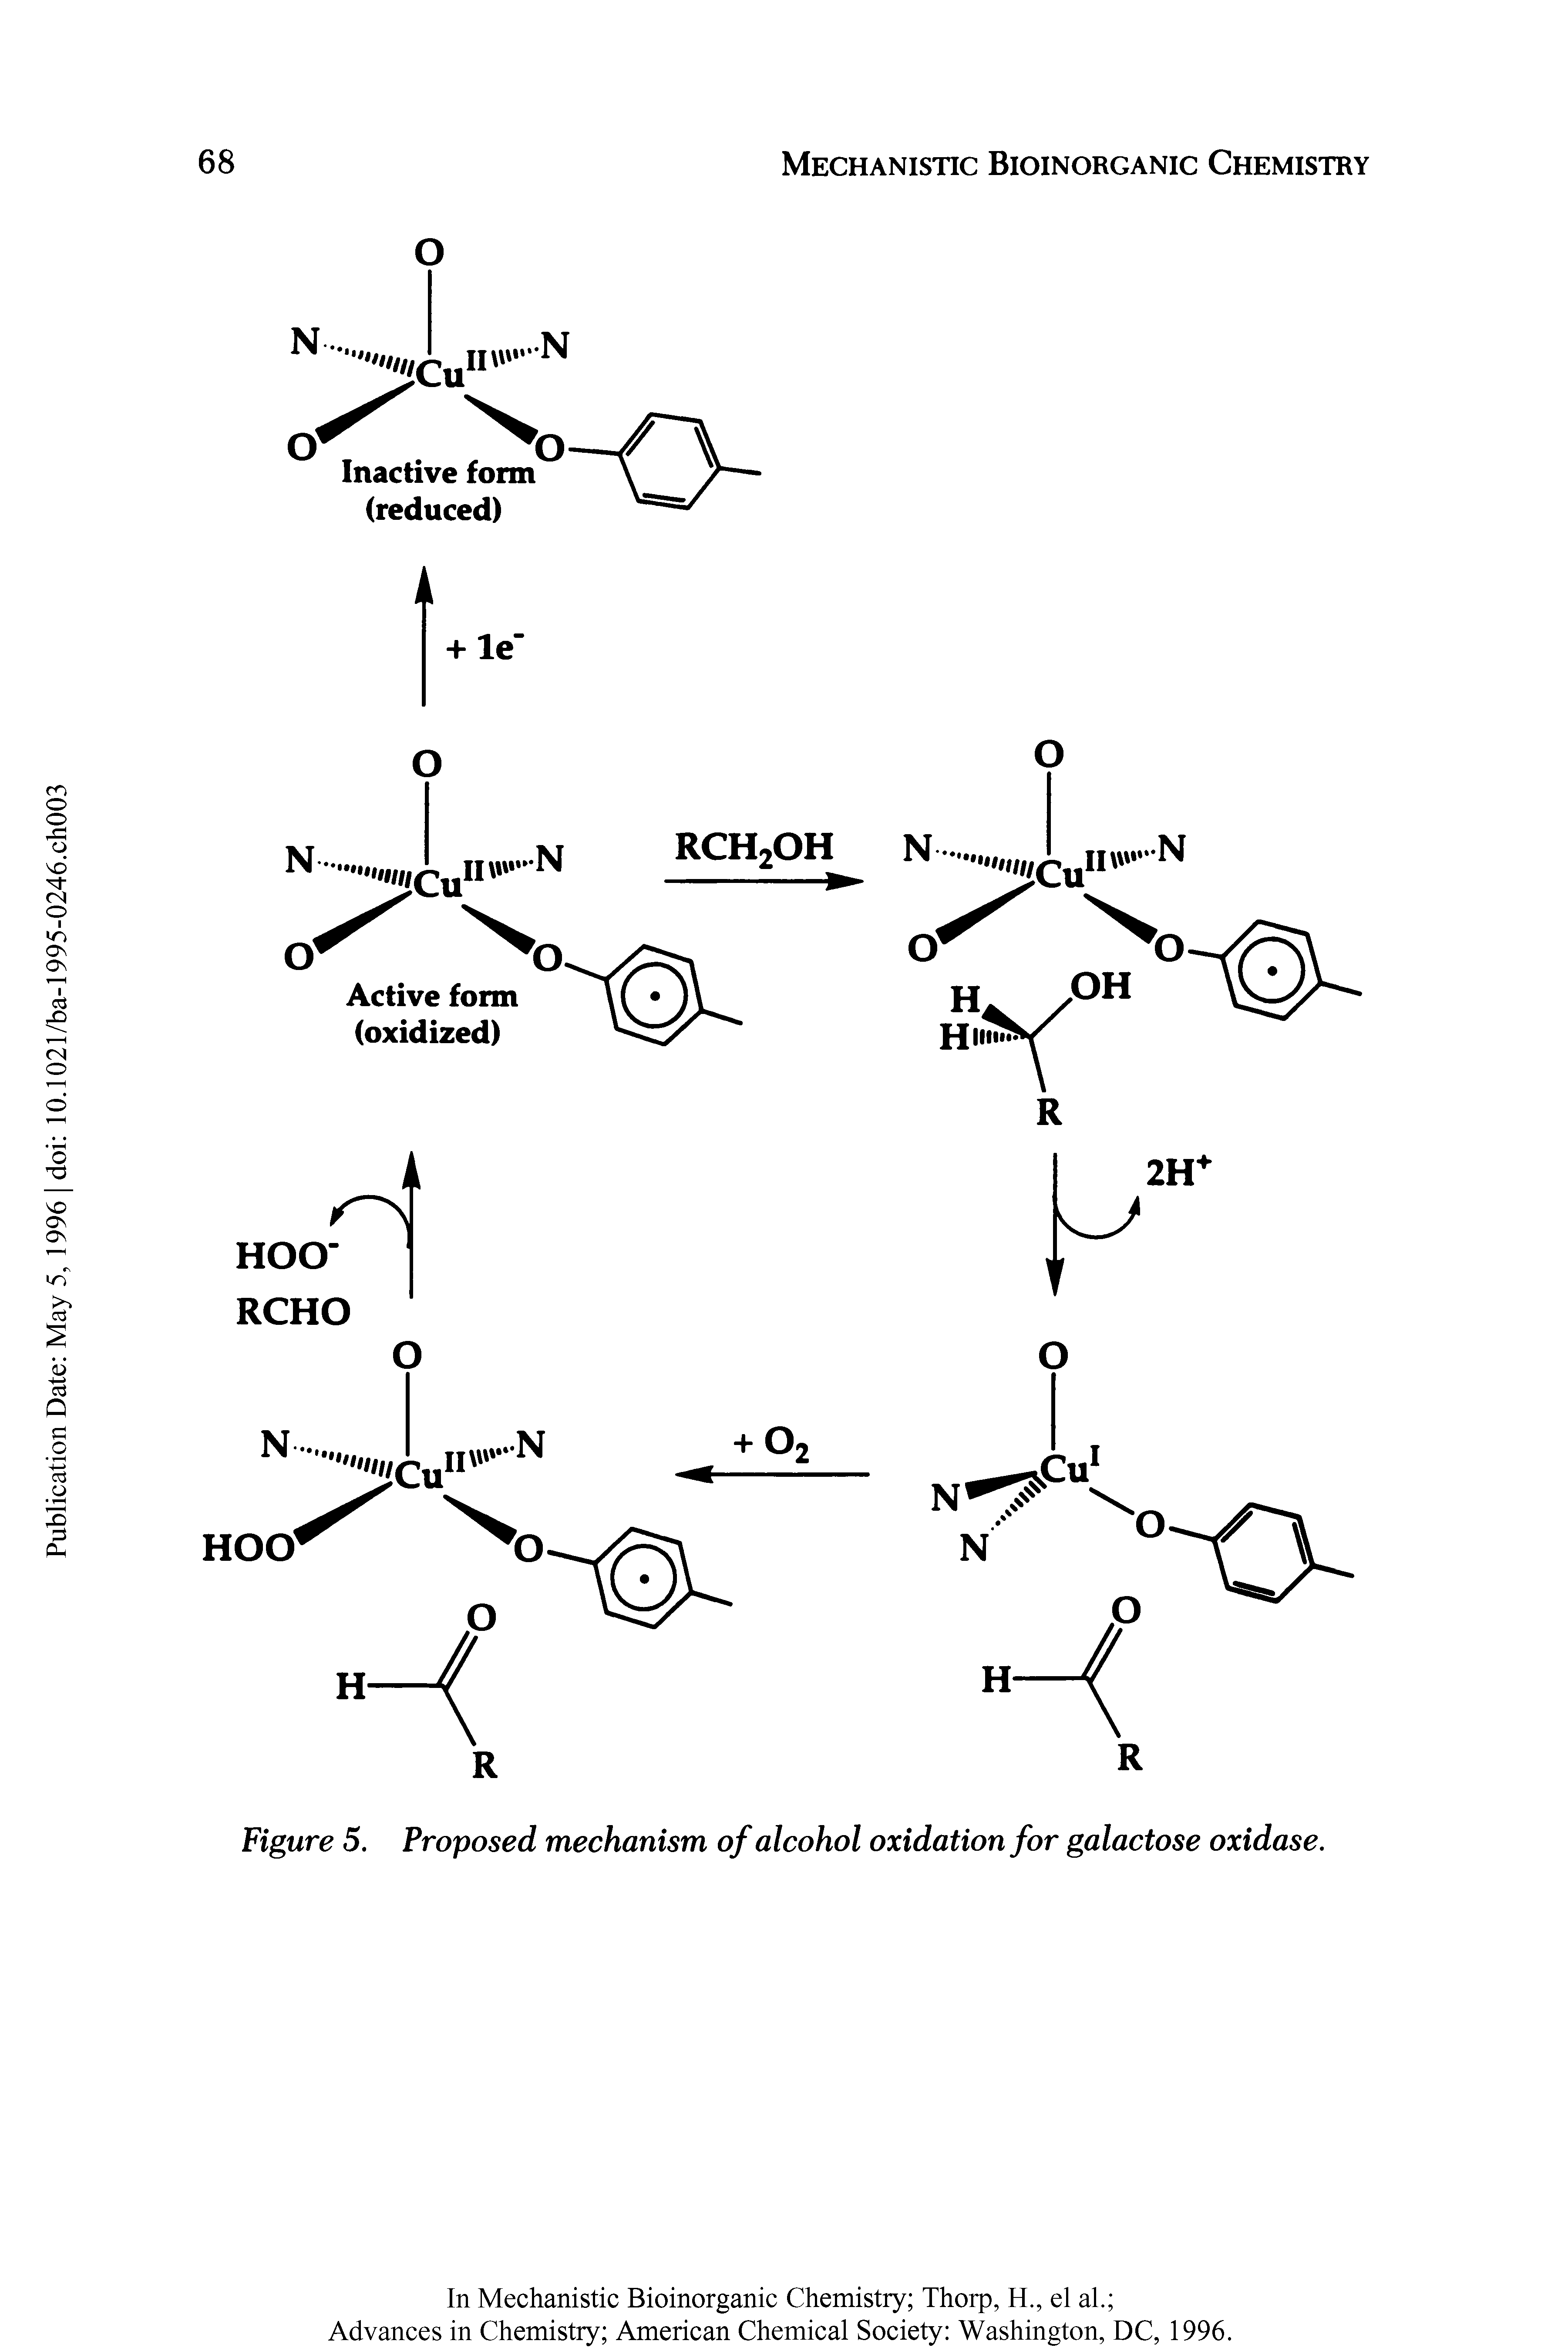 Figure 5. Proposed mechanism of alcohol oxidation for galactose oxidase.